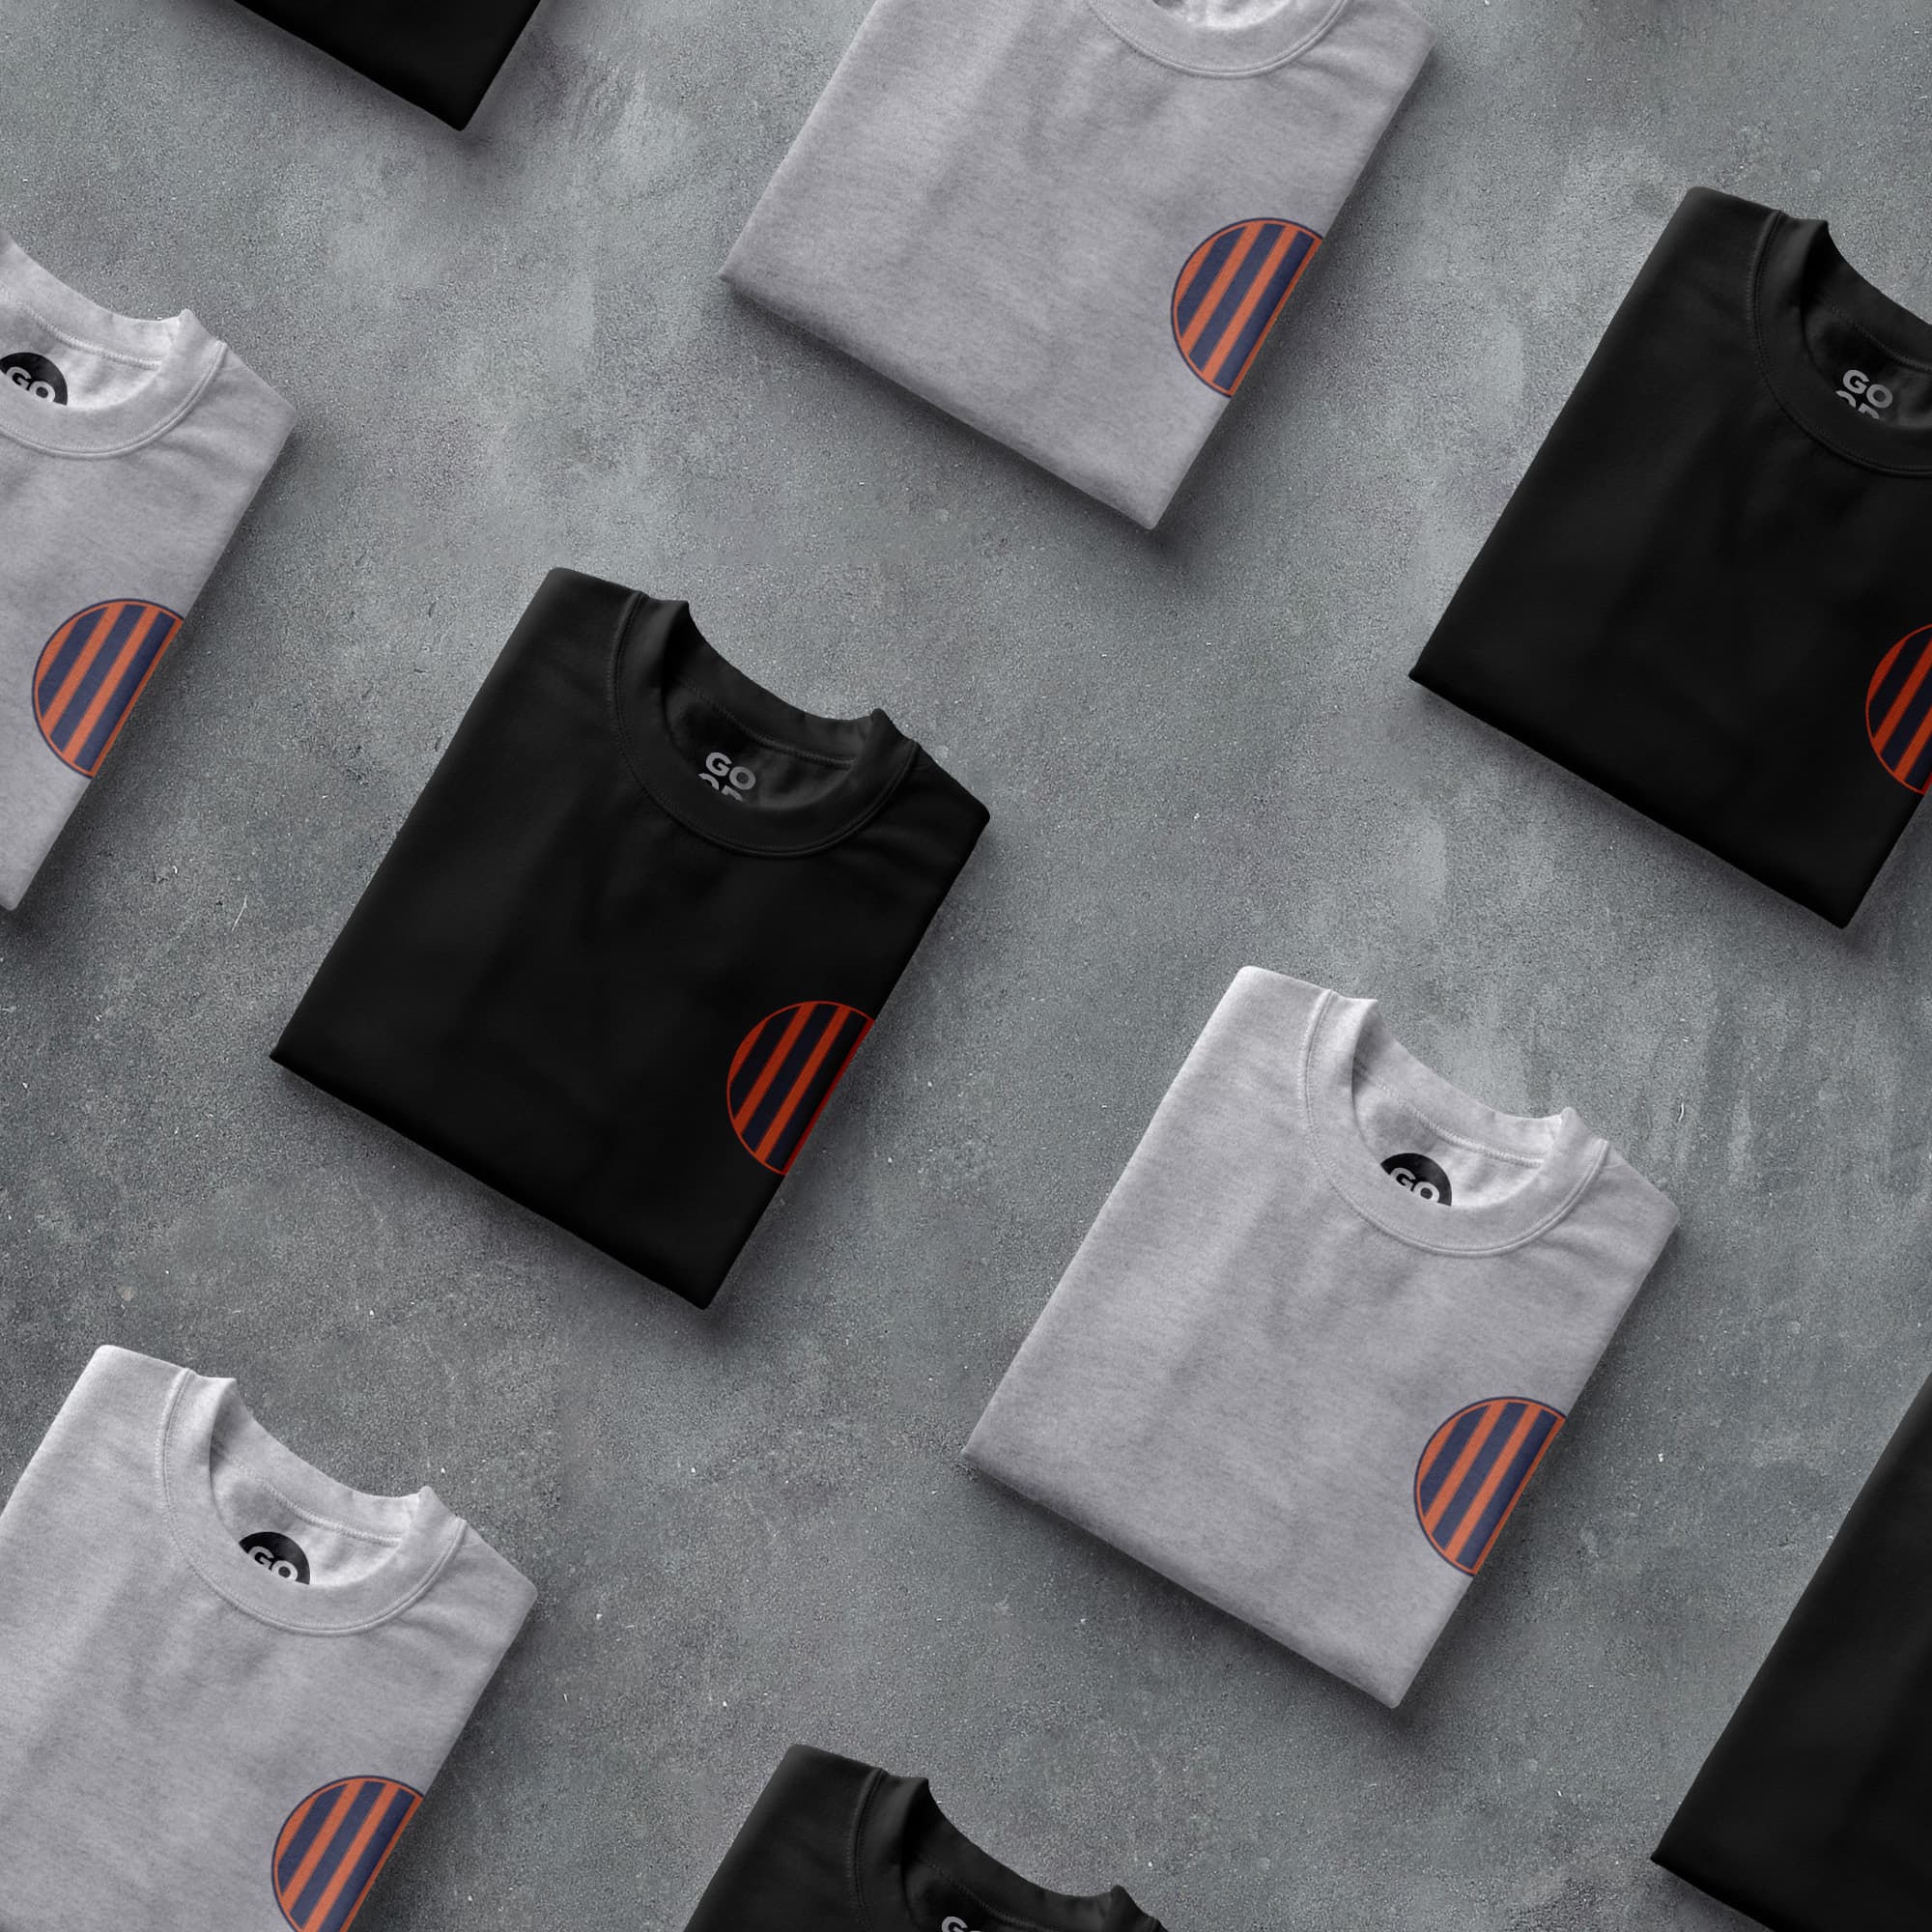 a group of black and white shirts with red stripes